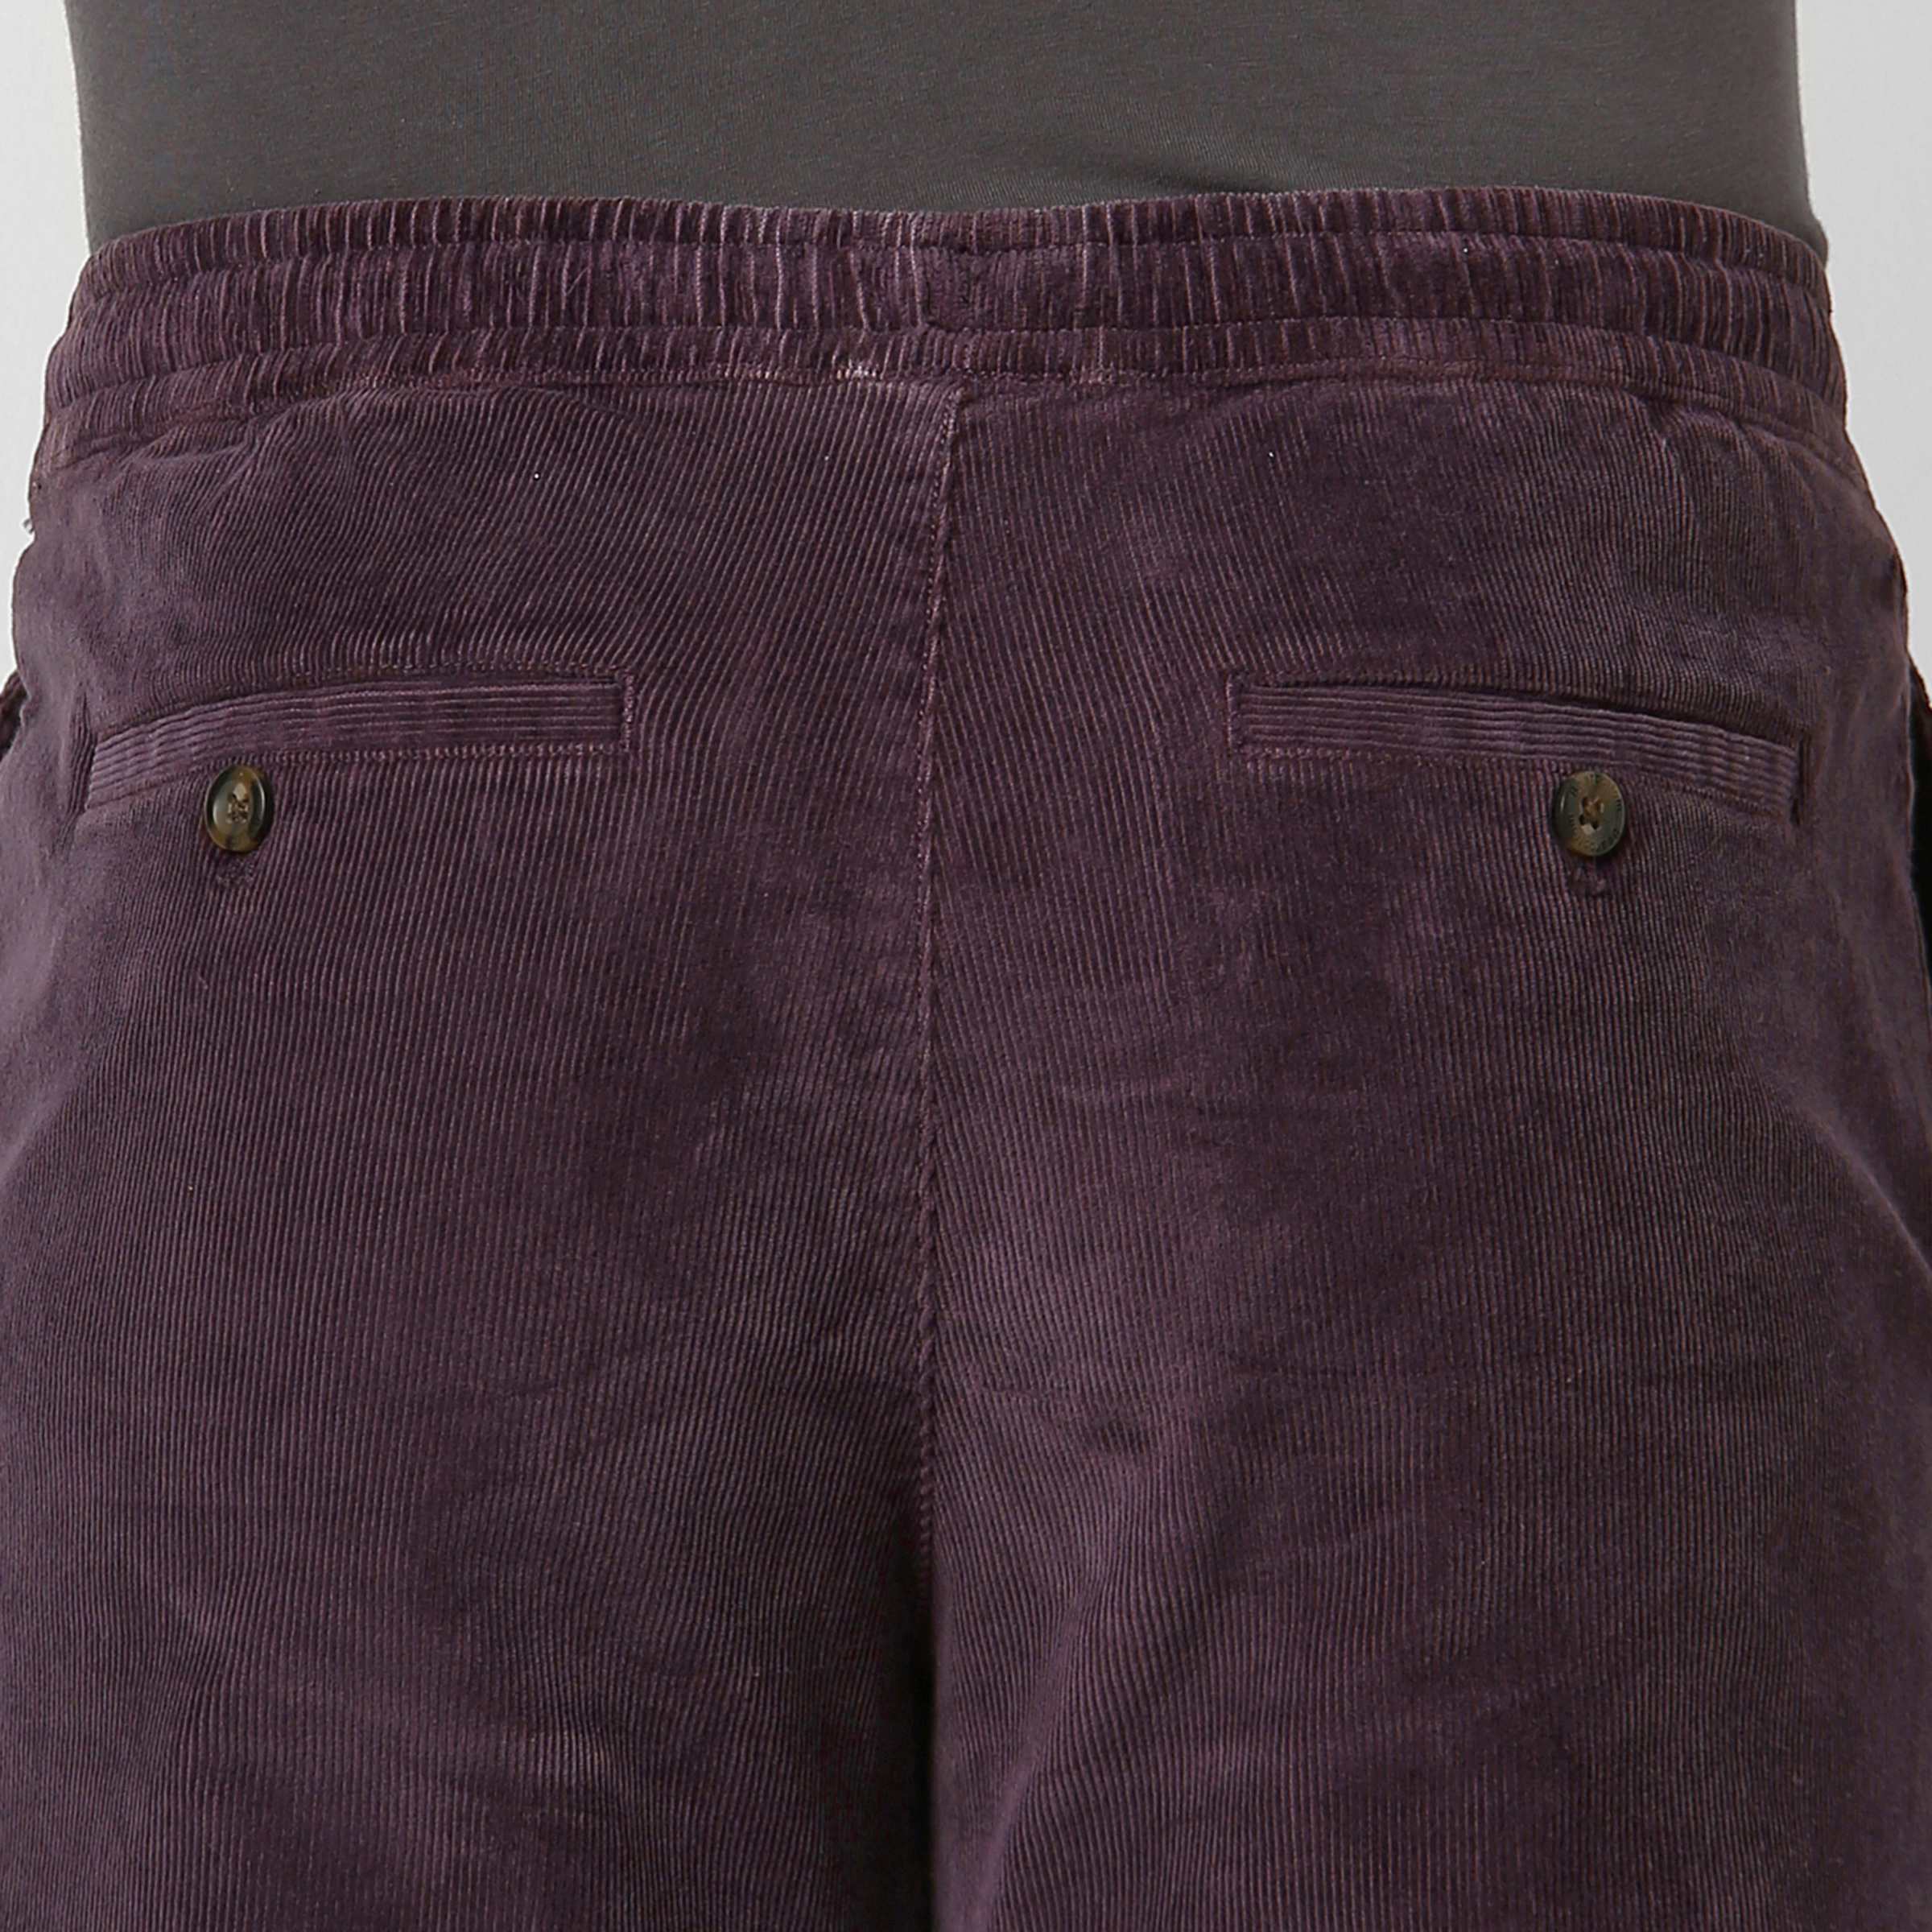 Corduroy Easy Pant Dark Purple close up back button pockets on model